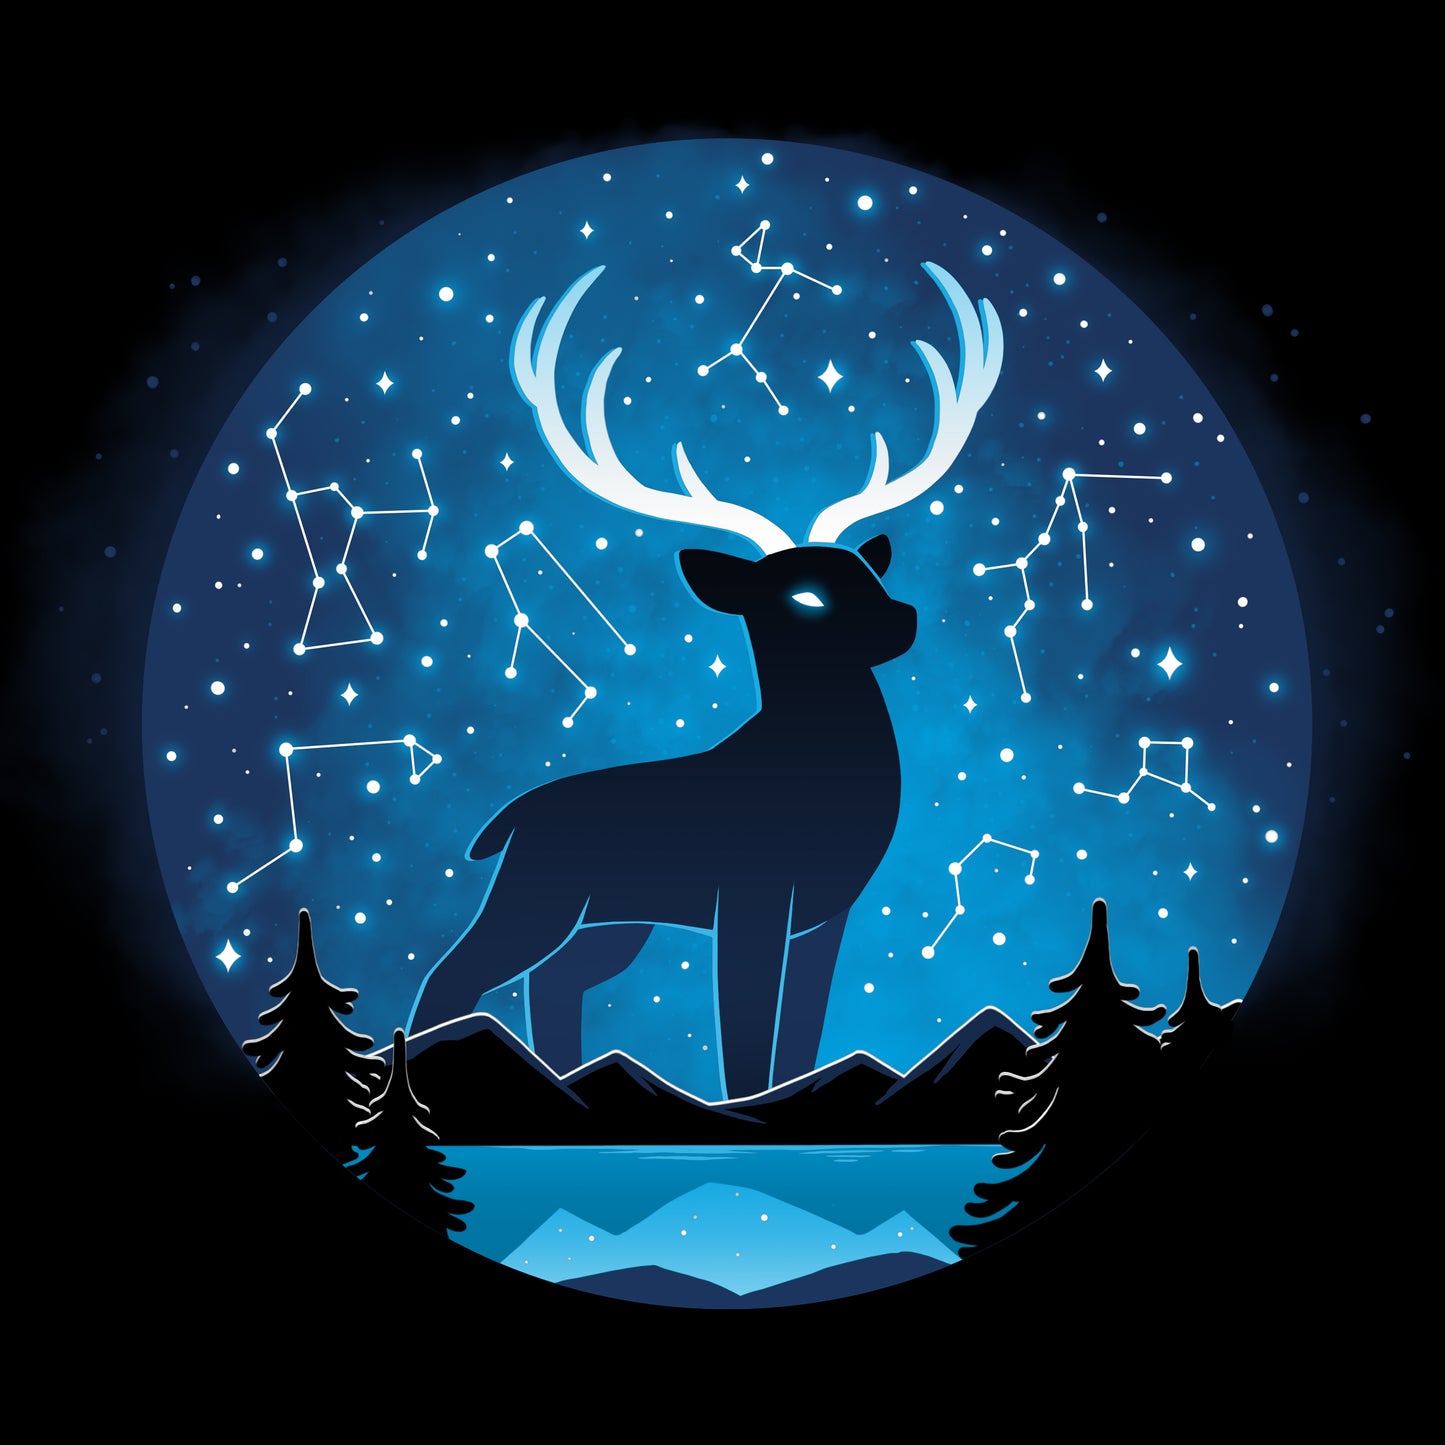 An ethereal Celestial Stag (Glow) standing in the night sky with constellations, glowing softly, brought to you by TeeTurtle.